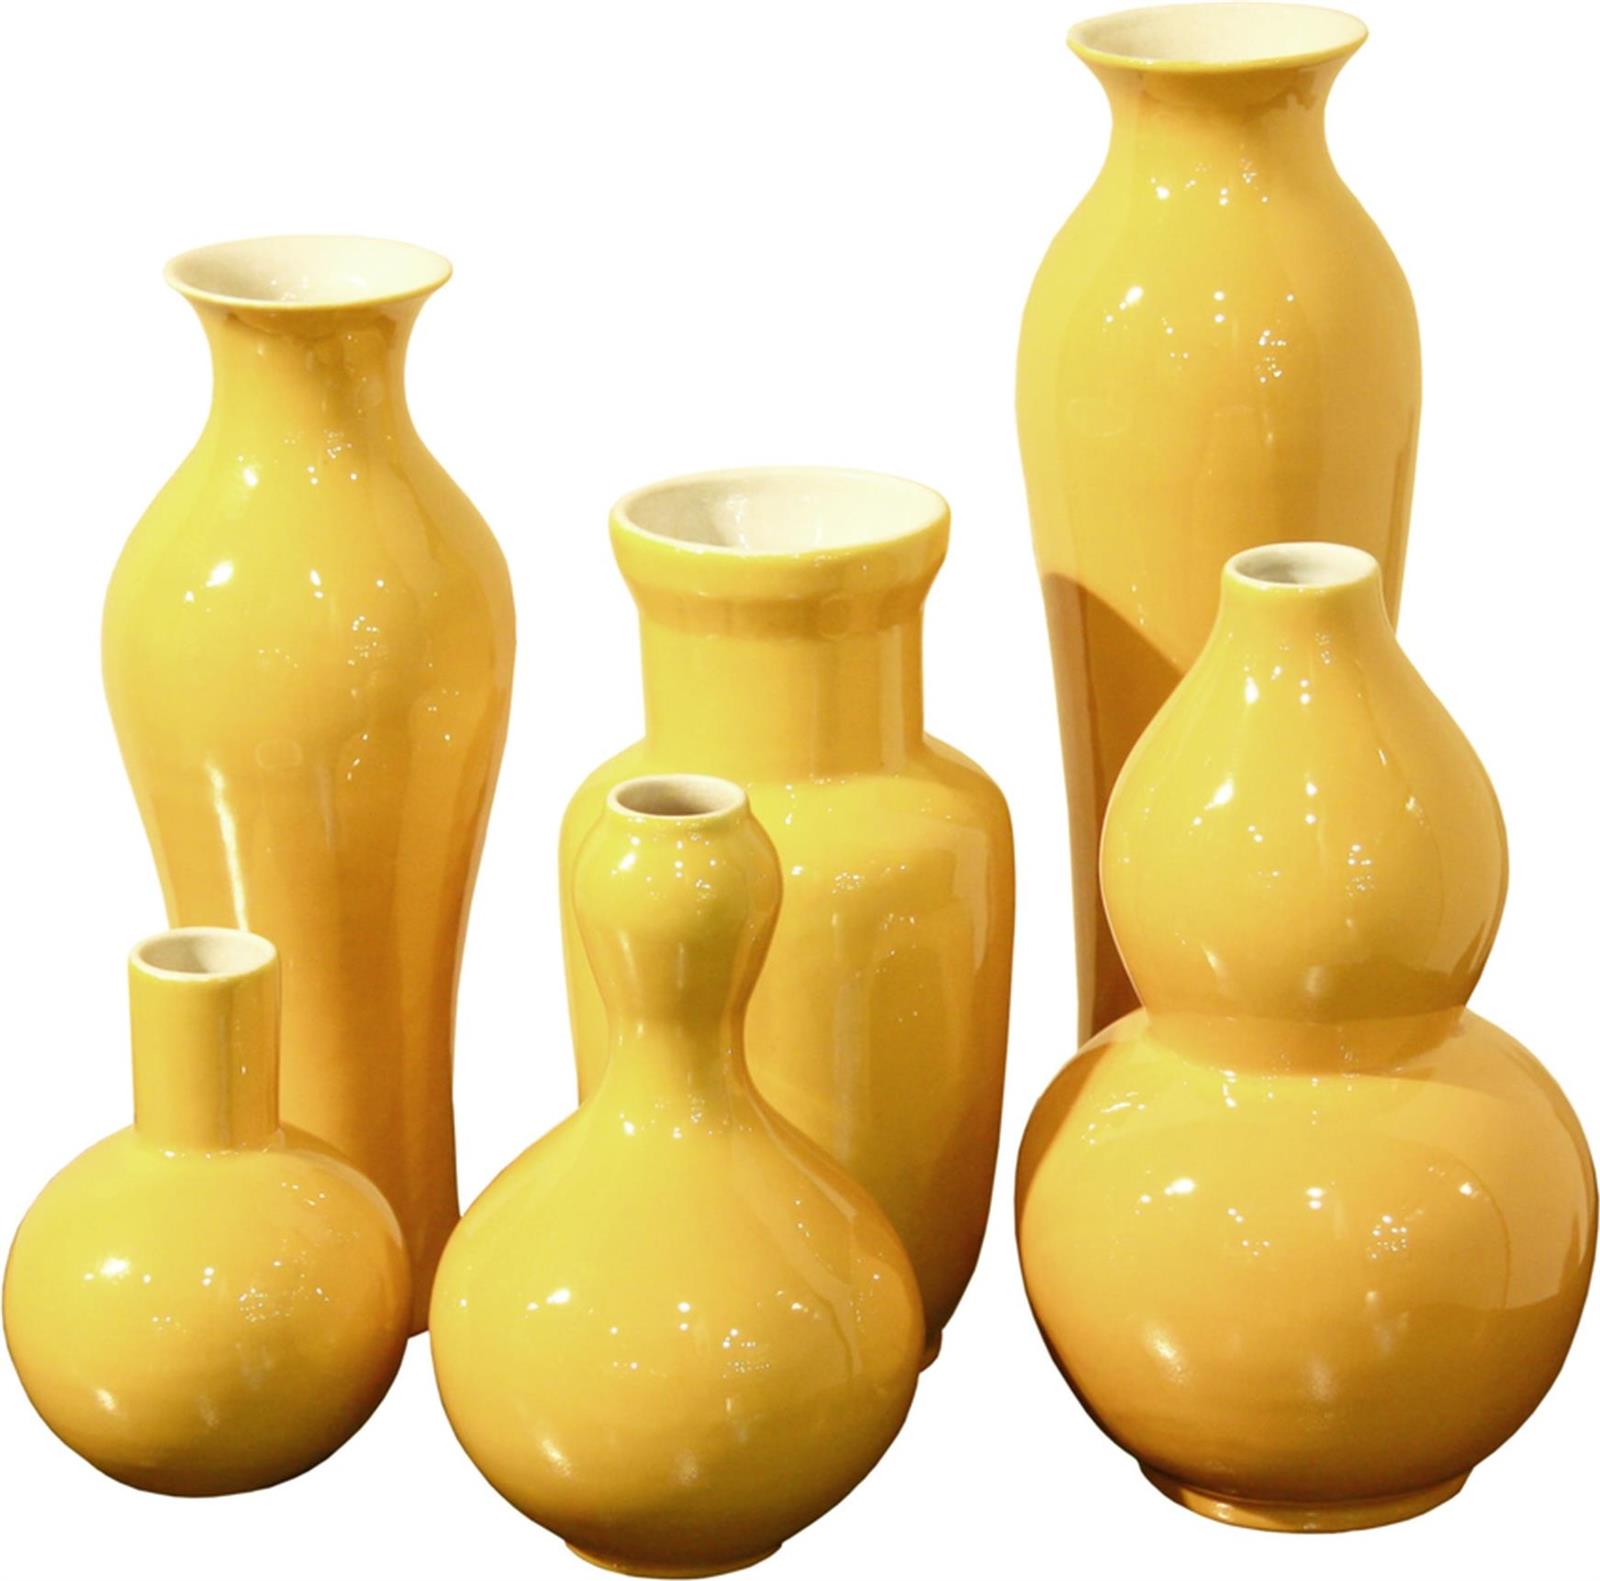 Vases Vase Assorted Colors May Vary Yellow Variable Set 6 Ceramic Handmade-Image 1